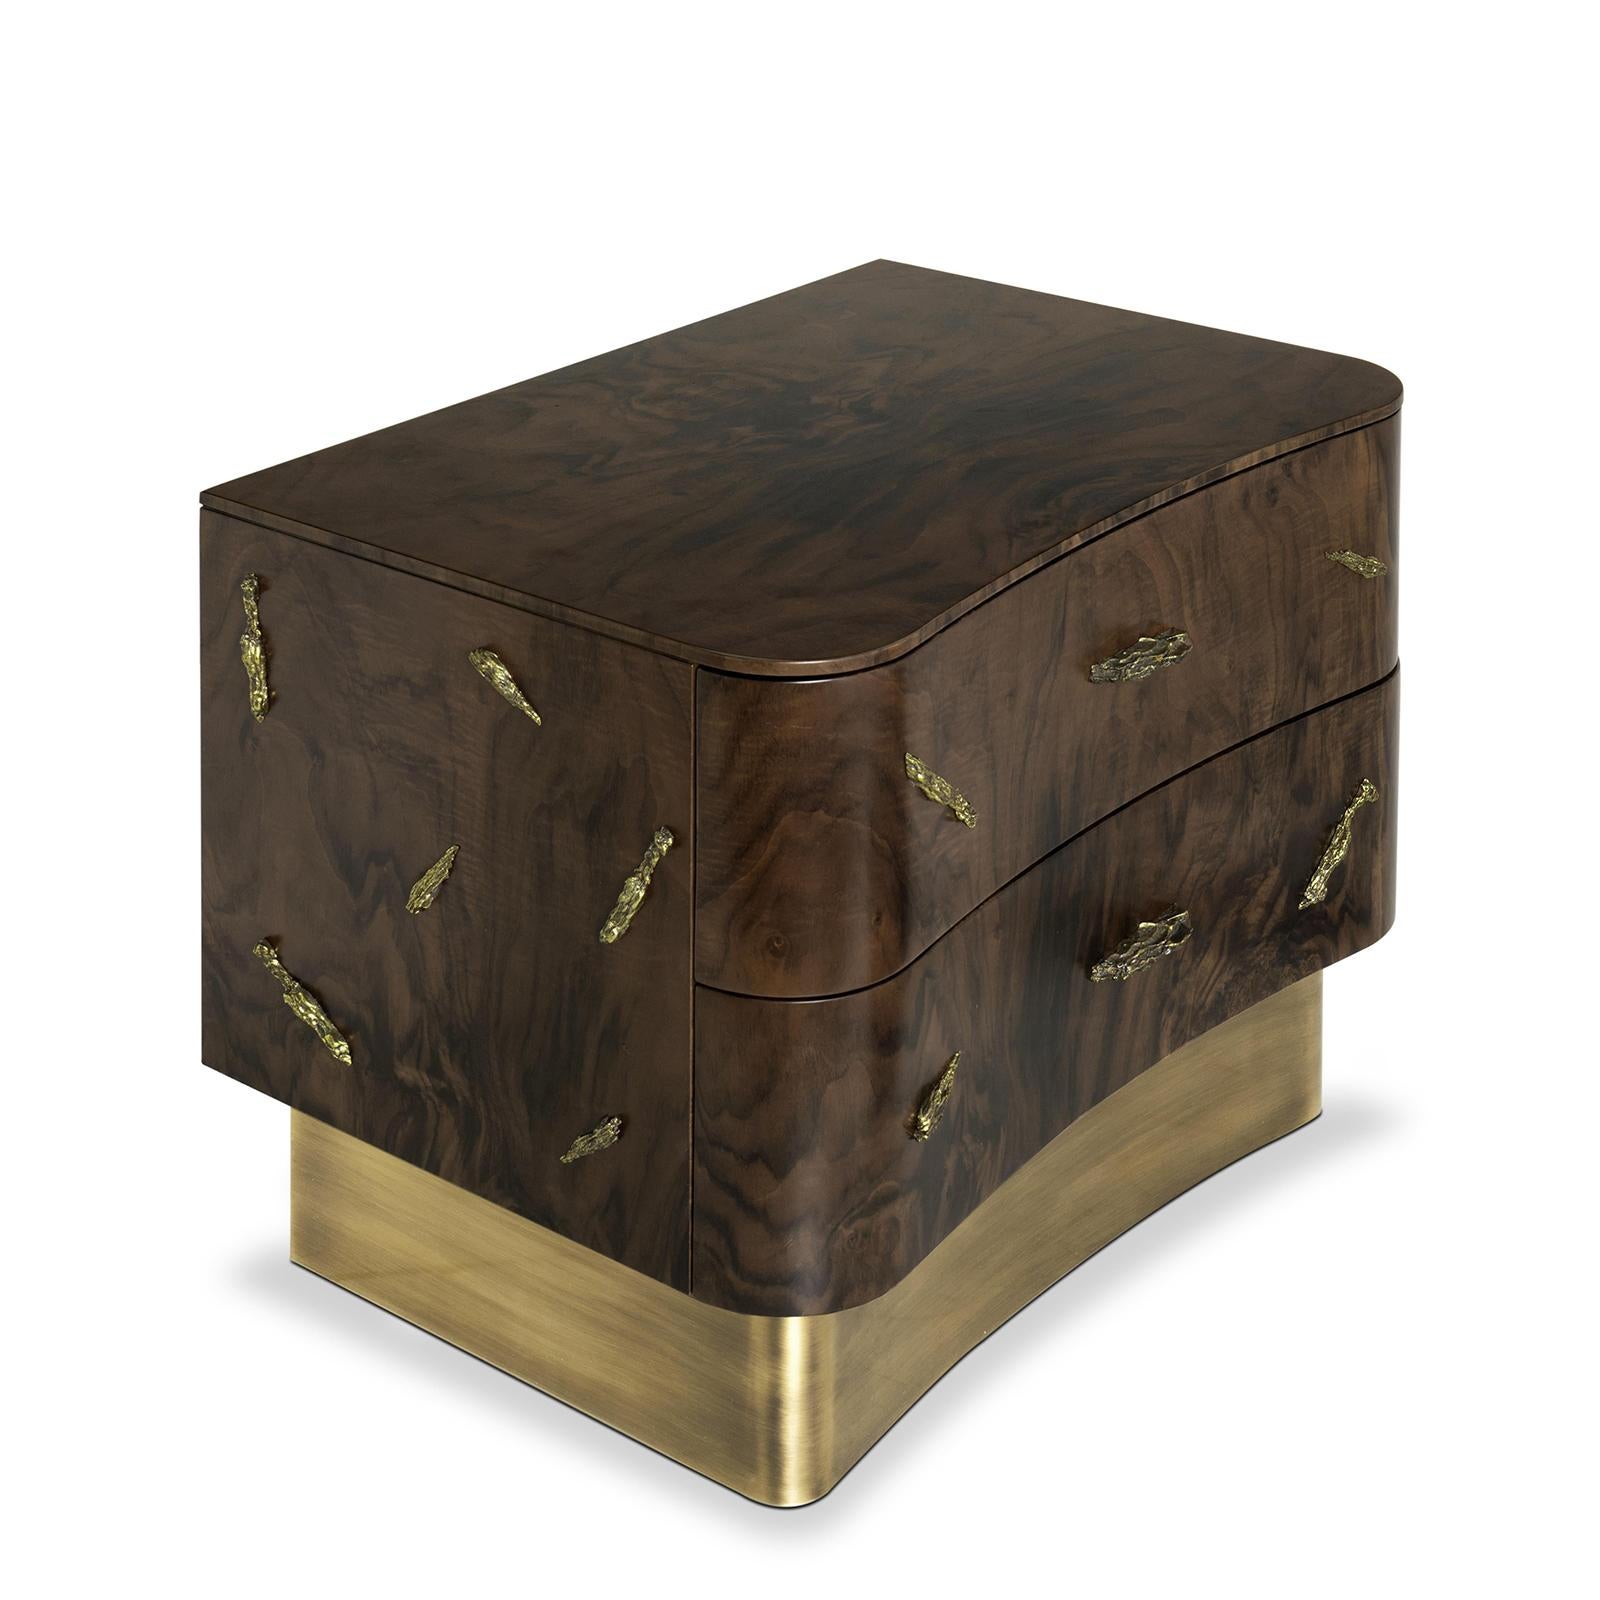 Nightstand Tarius with wooden structure with solid walnut
veneer in matte finish. With polished solid brass details
and with brushed aged brass base.
With 2 drawers made inside with solid poplar wood 
veneer with walnut veneer fronts in matte finish.